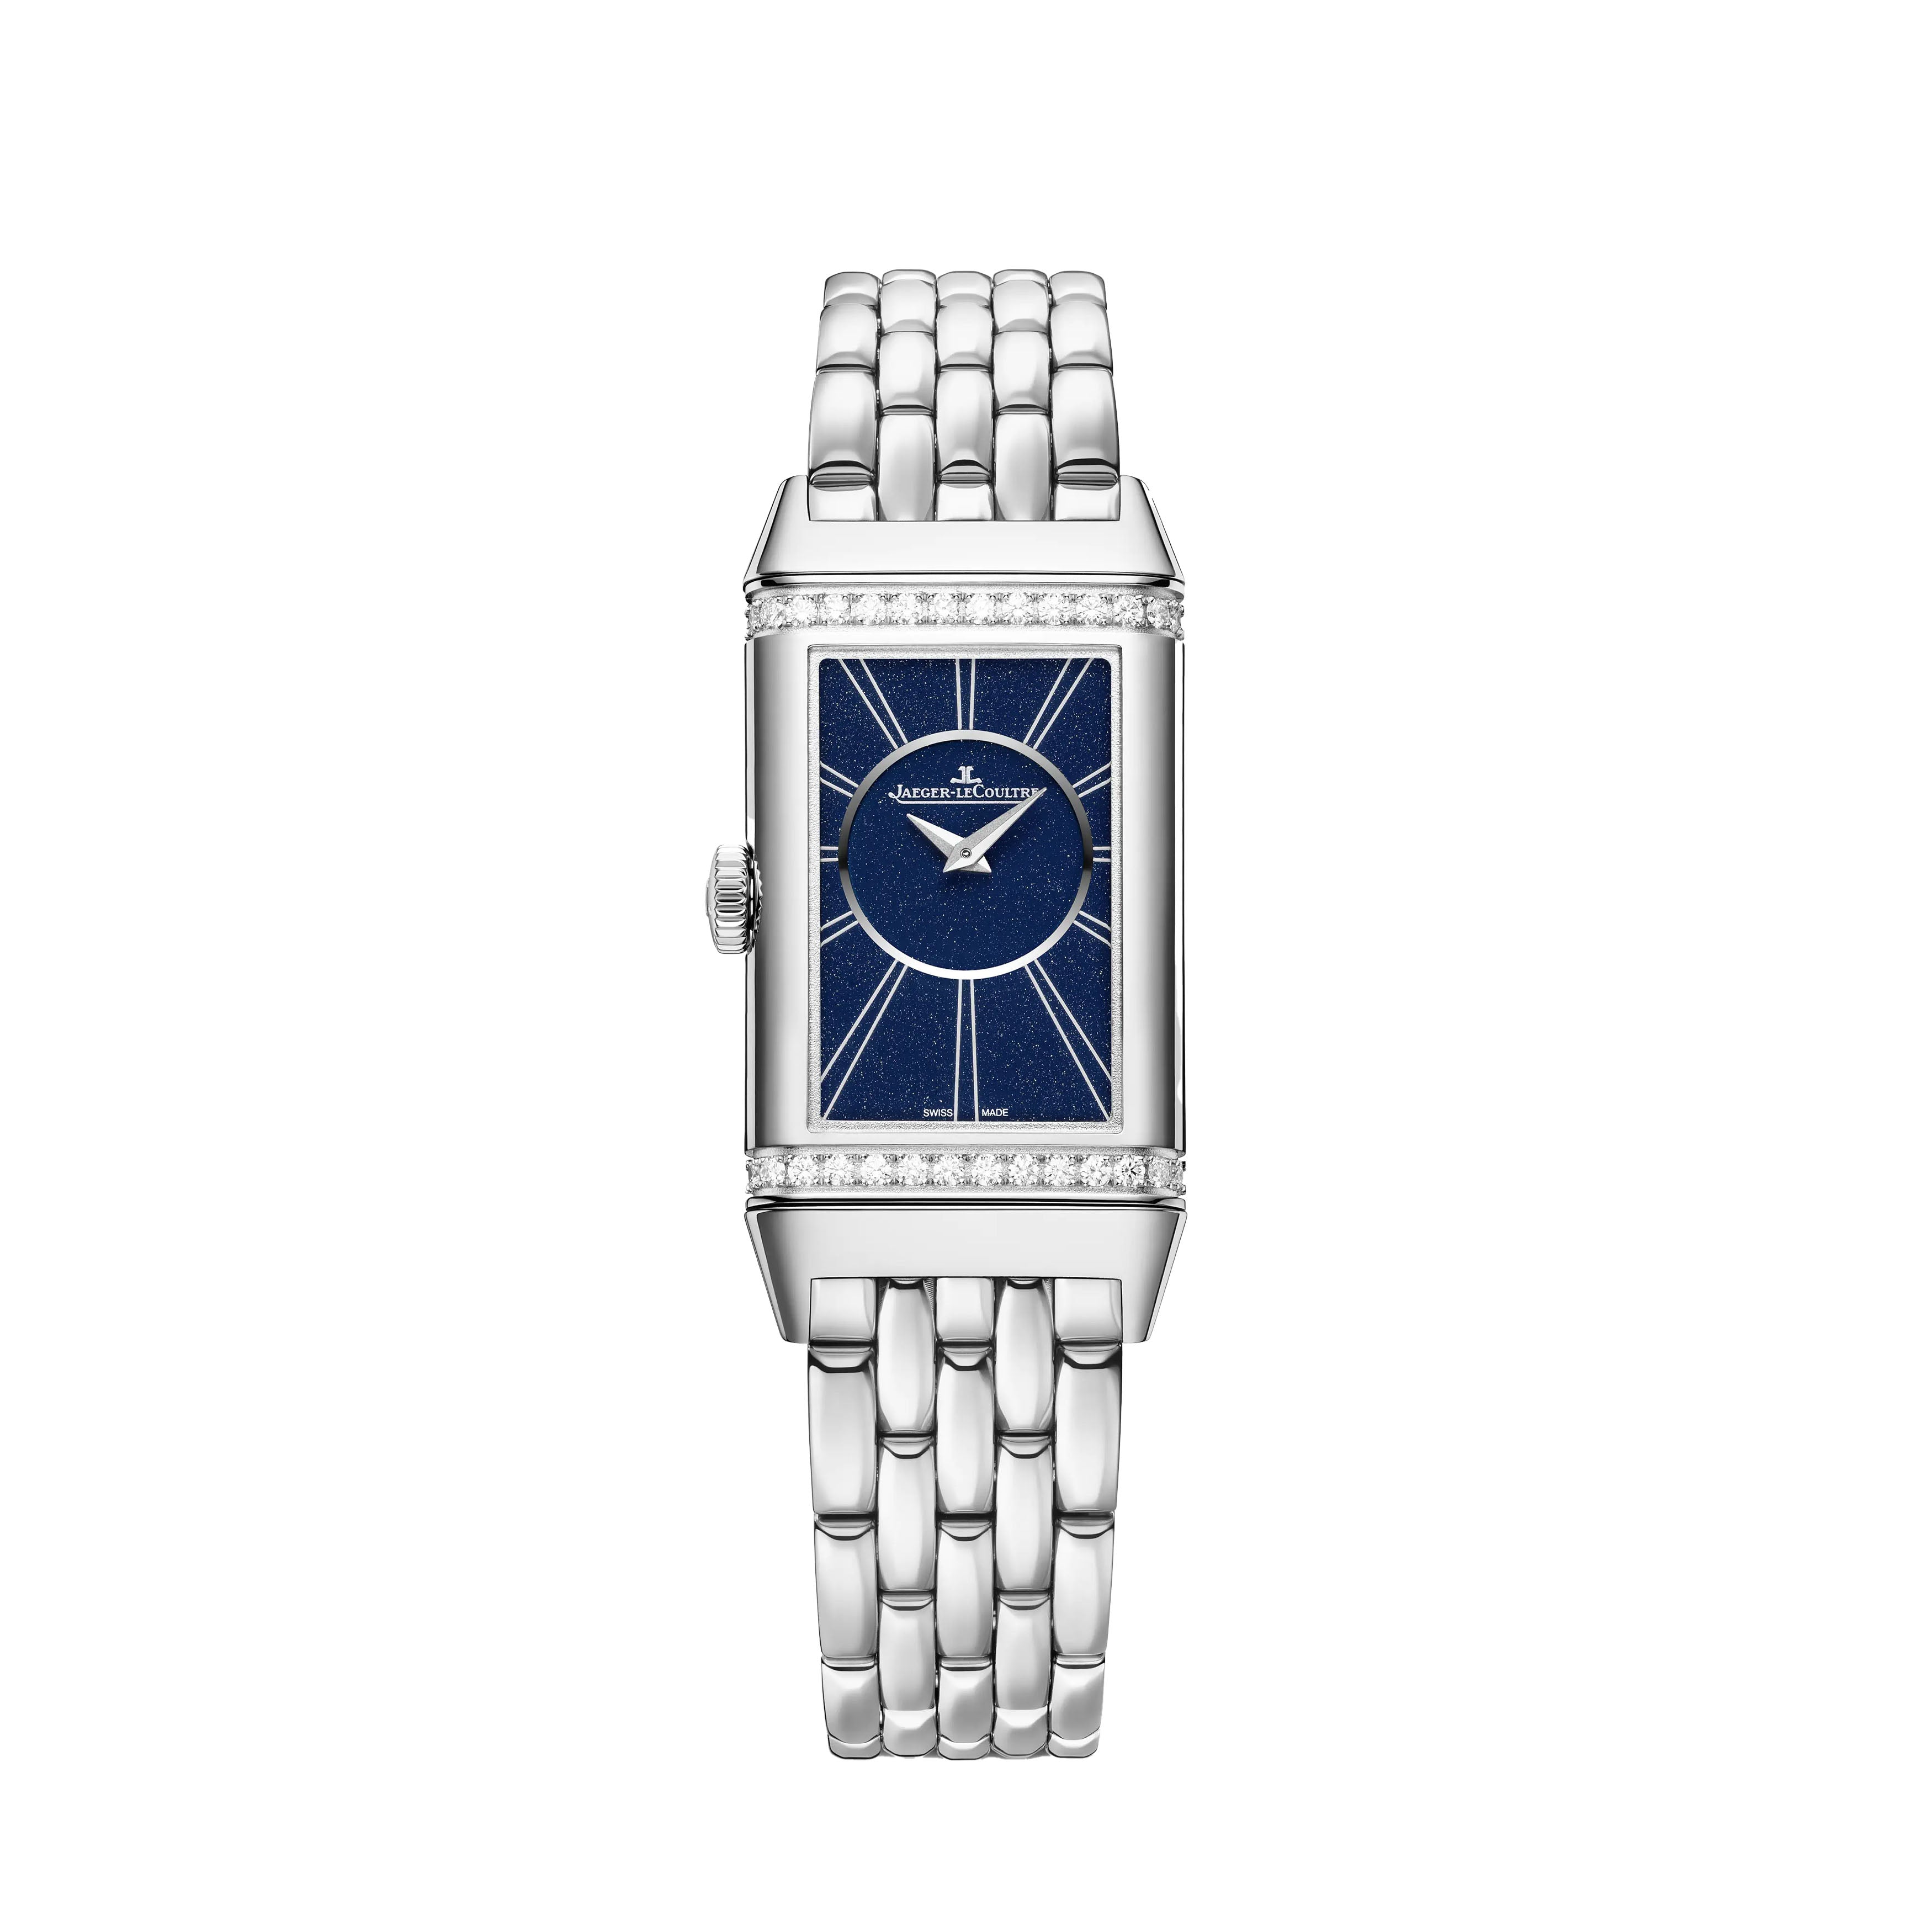 Jaeger-LeCoultre Reverso One Duetto Watch, 40.1x20mm Silver Dial, Q334818J